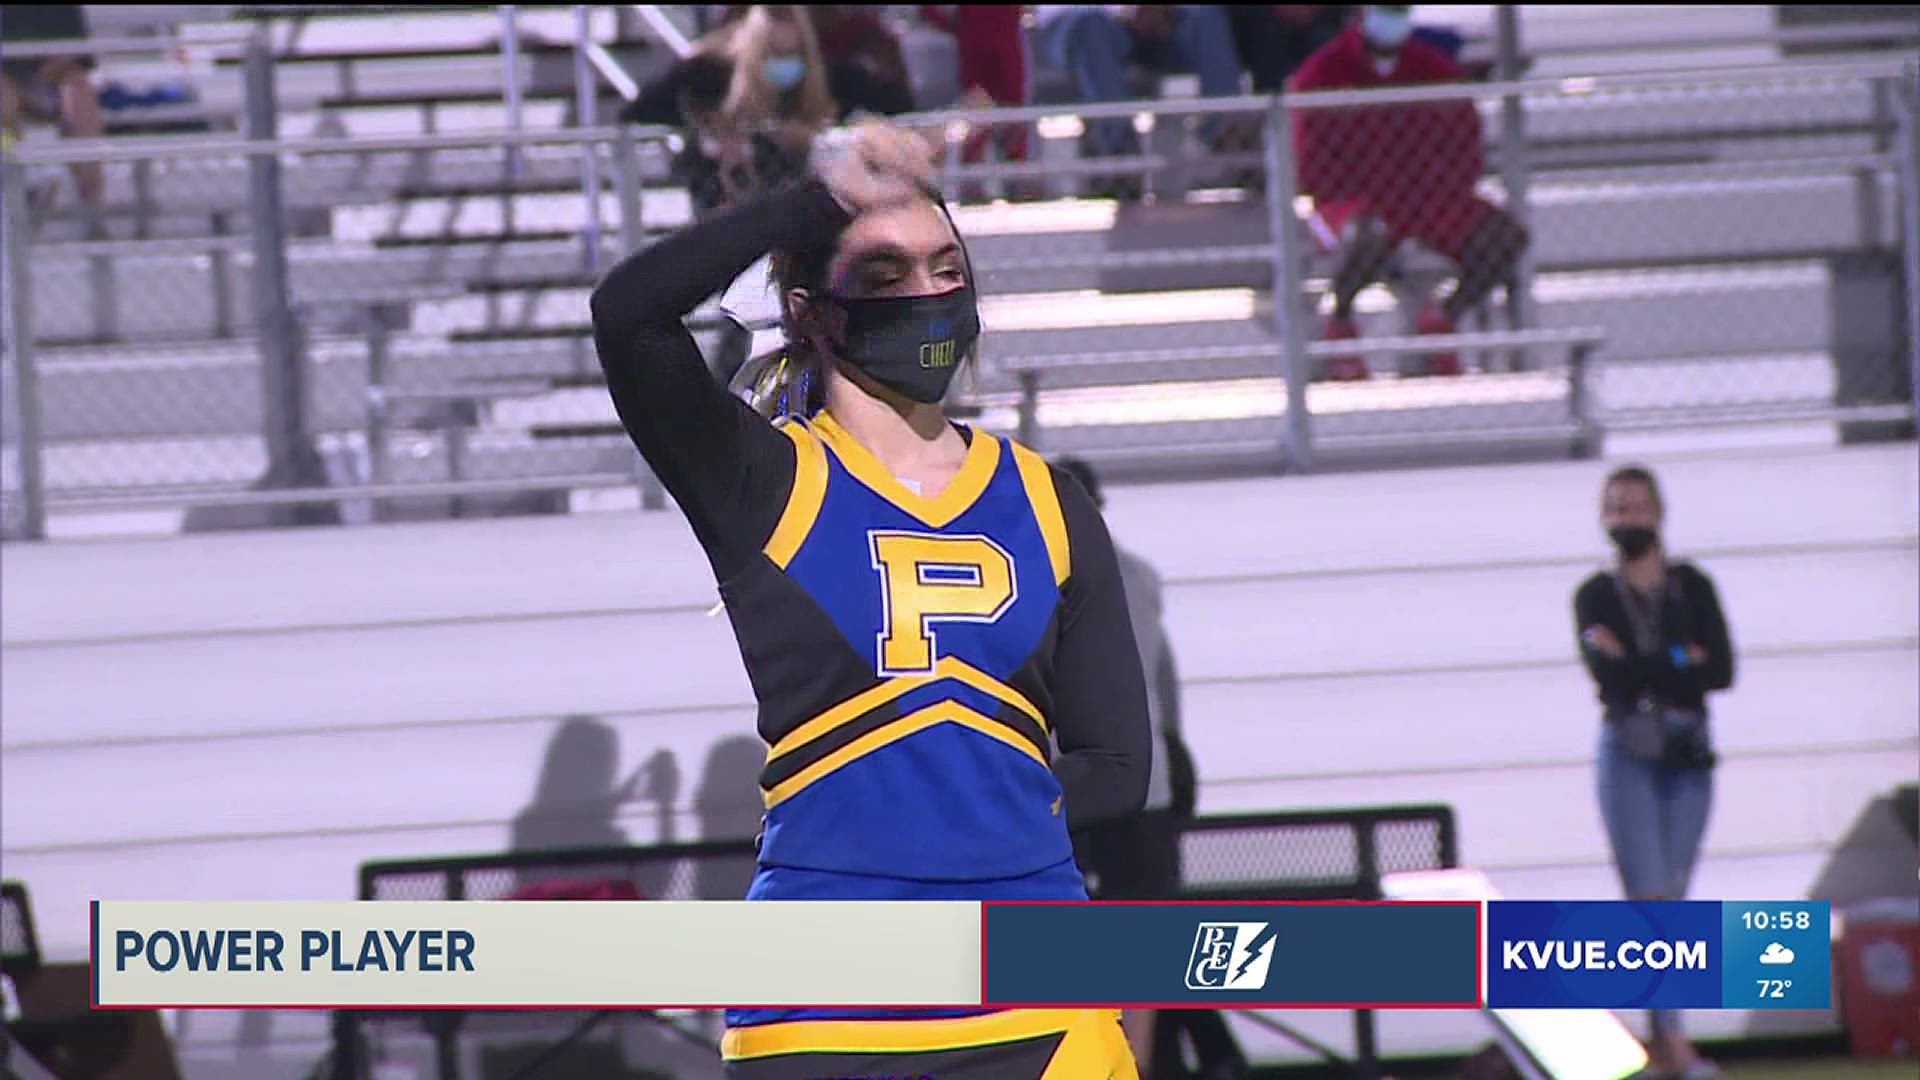 KVUE's Power Player of the Week is Pflugerville cheer captain Daniella Cadalzo. Join us for Friday Football Fever.